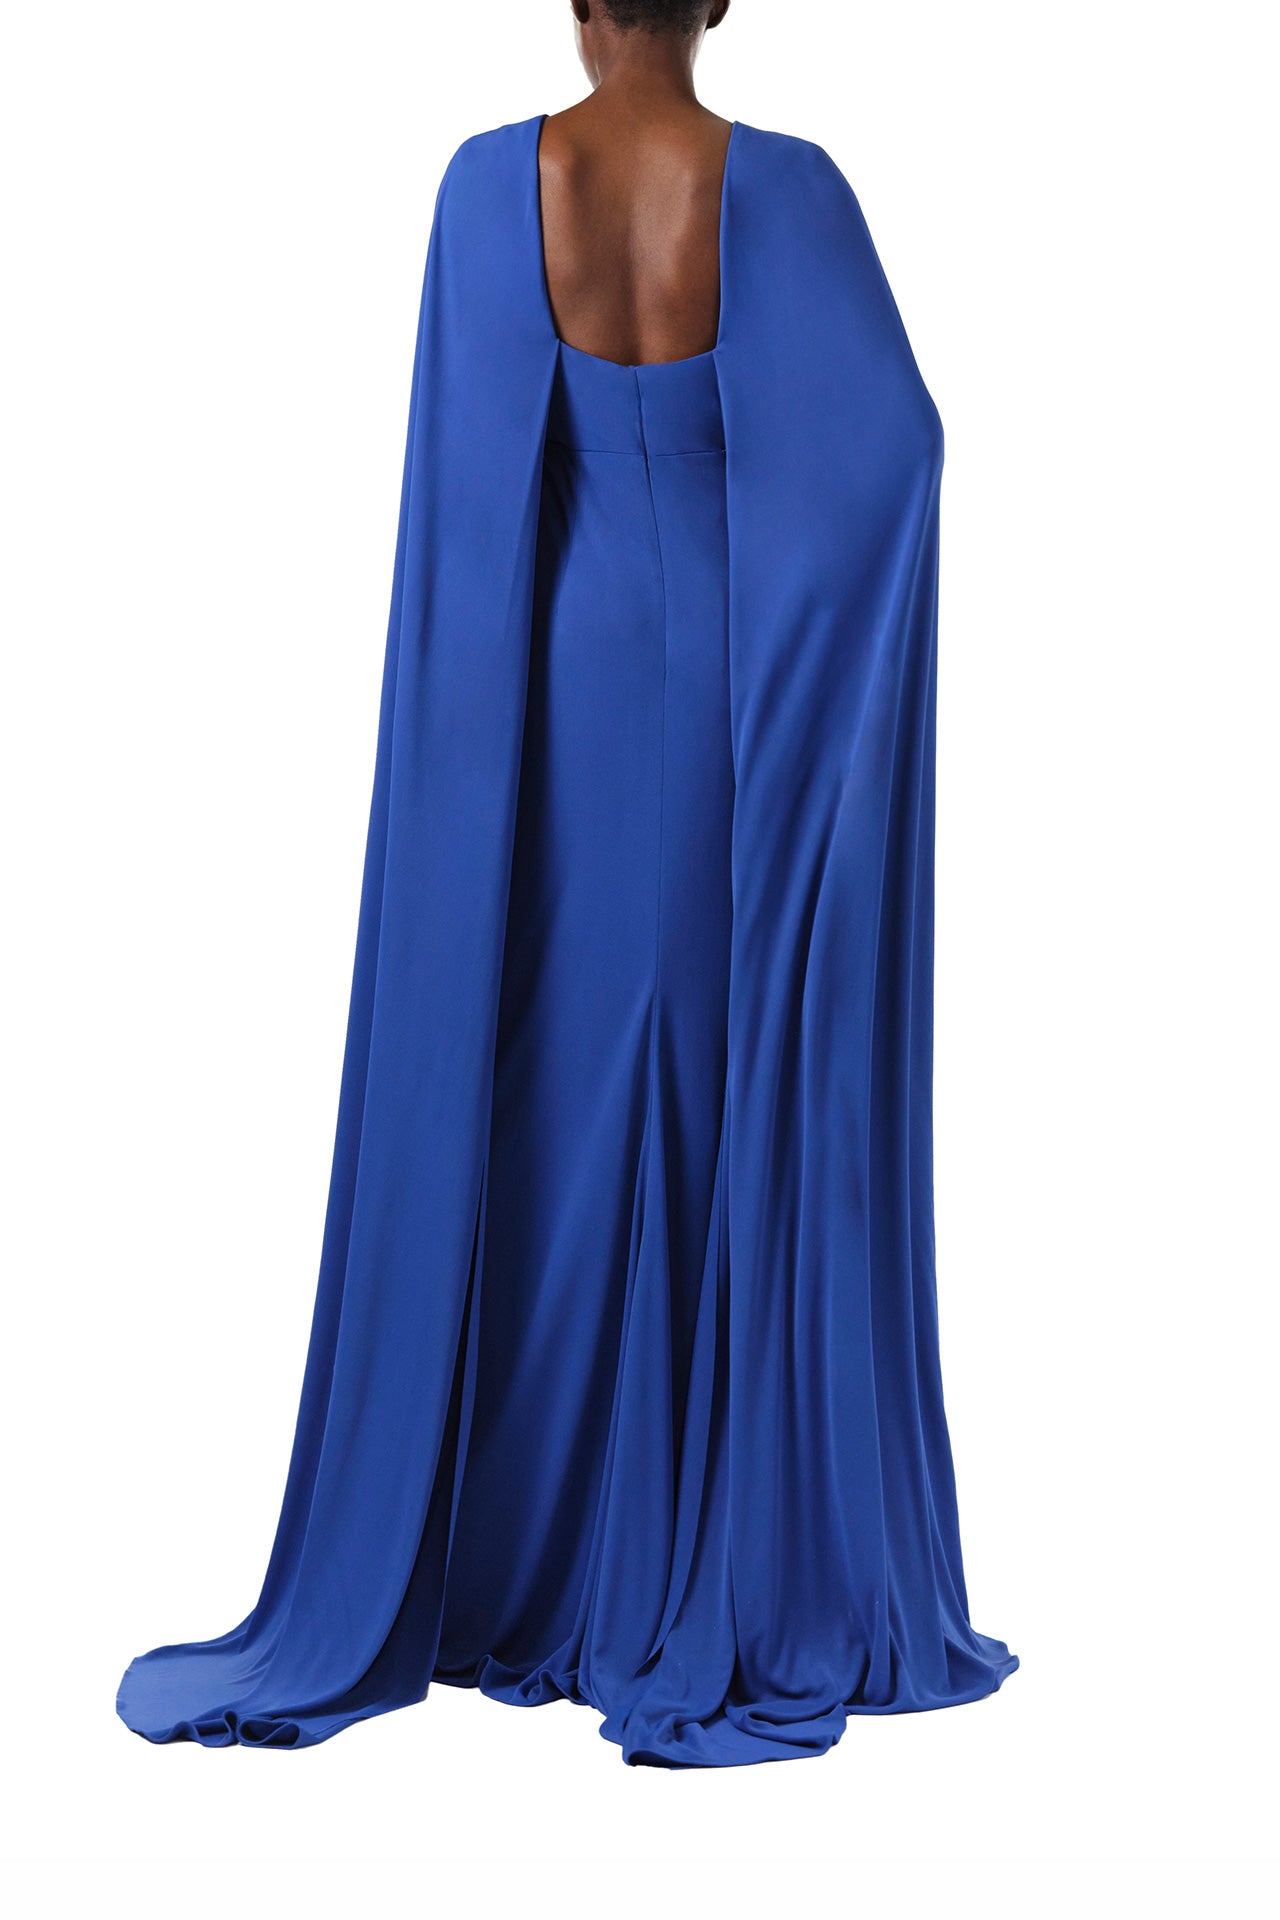 Monique Lhuillier Spring 2024 royal blue crepe-back satin gown with attached cape and keyhole bodice - back.